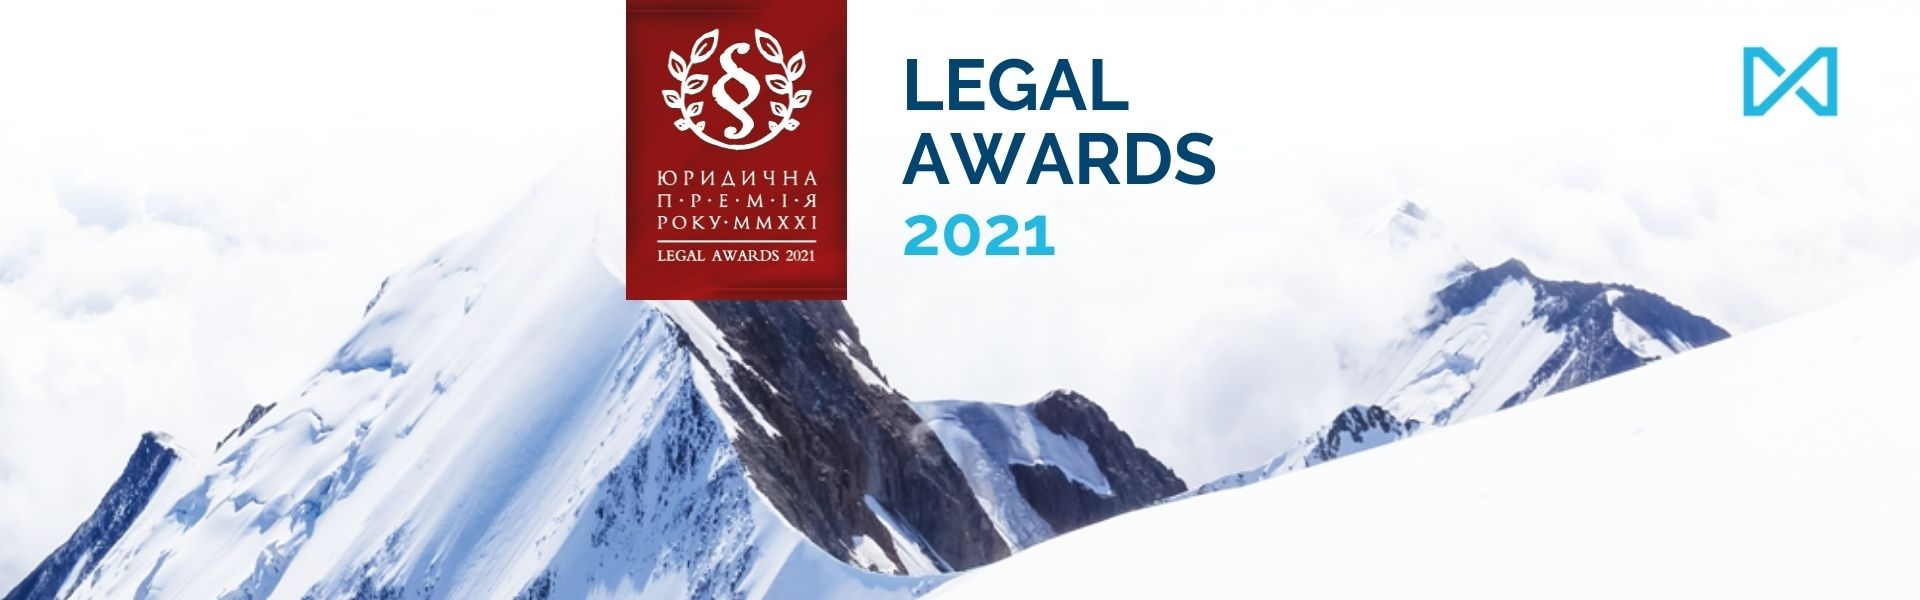 New achievements of EVERLEGAL at Legal Awards 2021